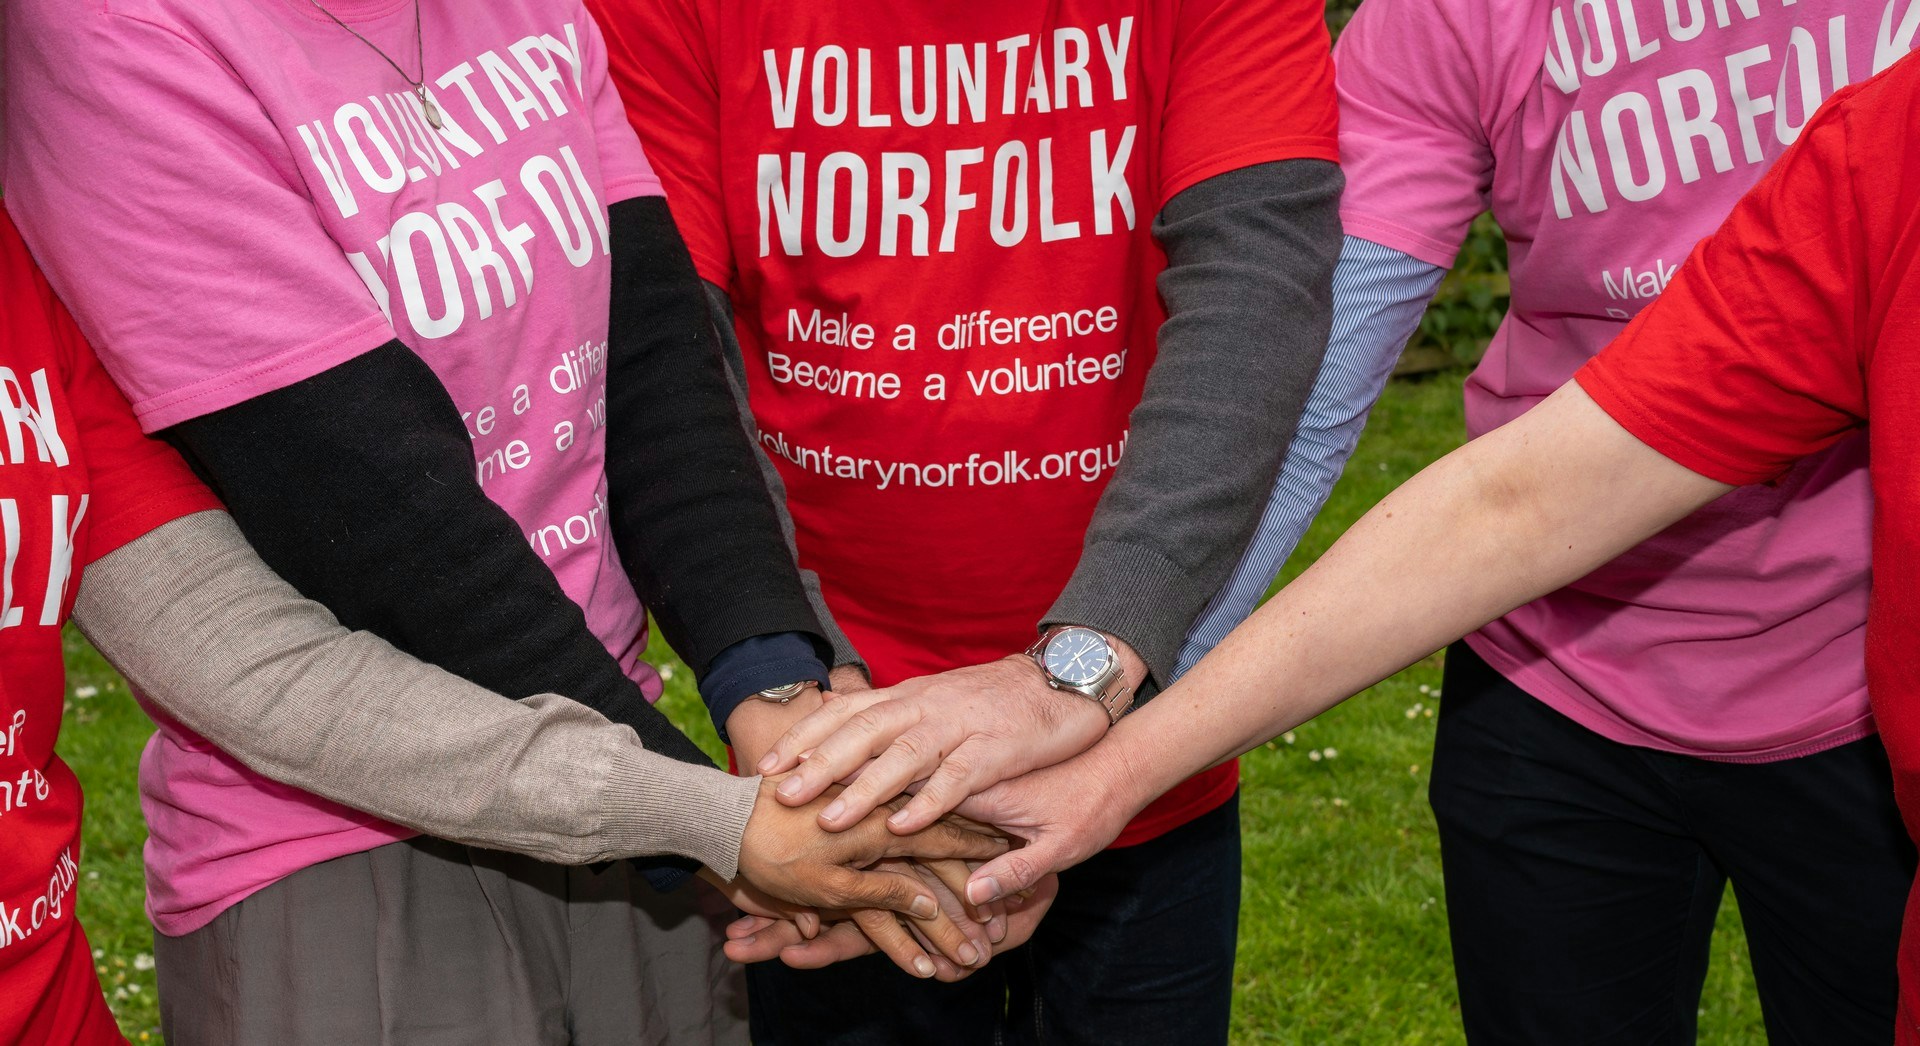 People wearing Voluntary Norfolk T-shirts stacking hands on top of each other